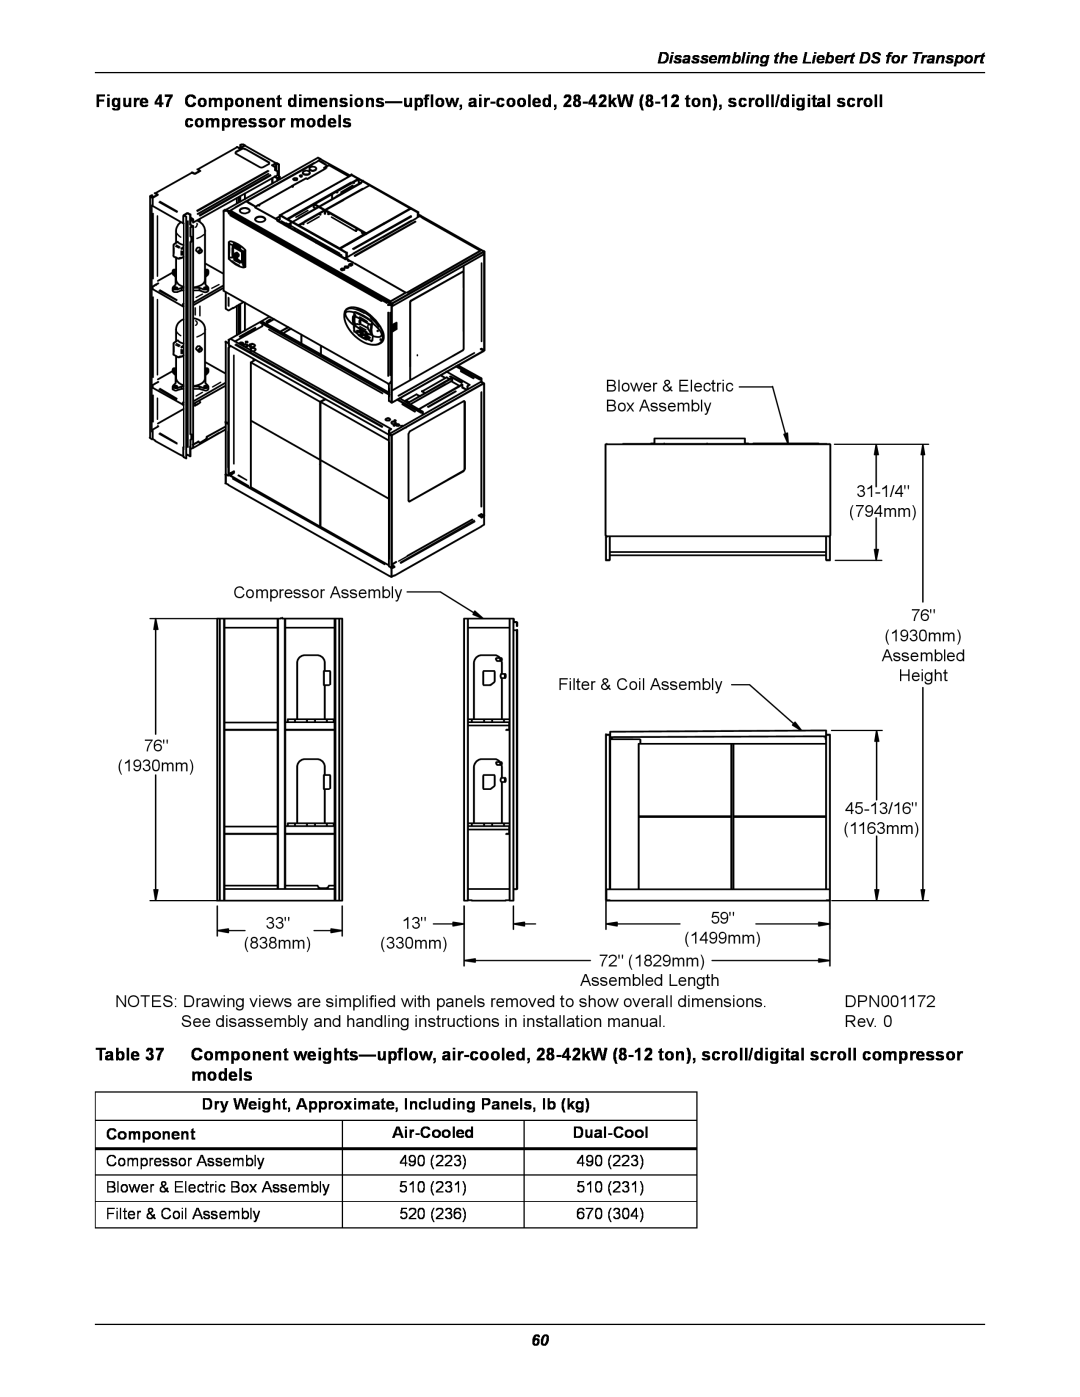 Liebert DS user manual Component dimensions-upflow, air-cooled, 28-42kW 8-12 ton, scroll/digital scroll compressor models 